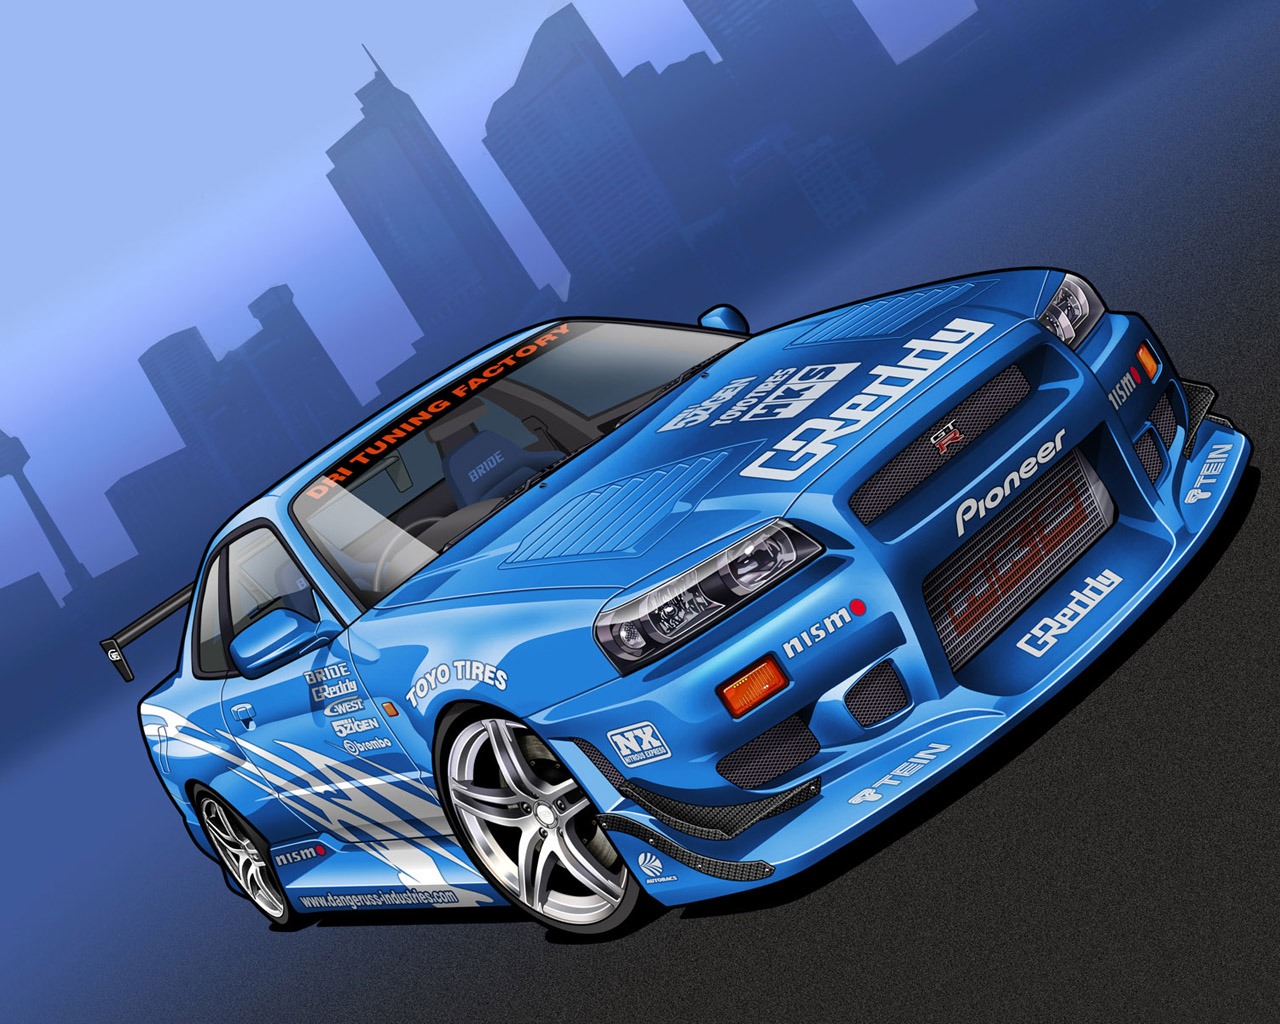 Computer Photoshop hand-painted wallpaper car #33 - 1280x1024